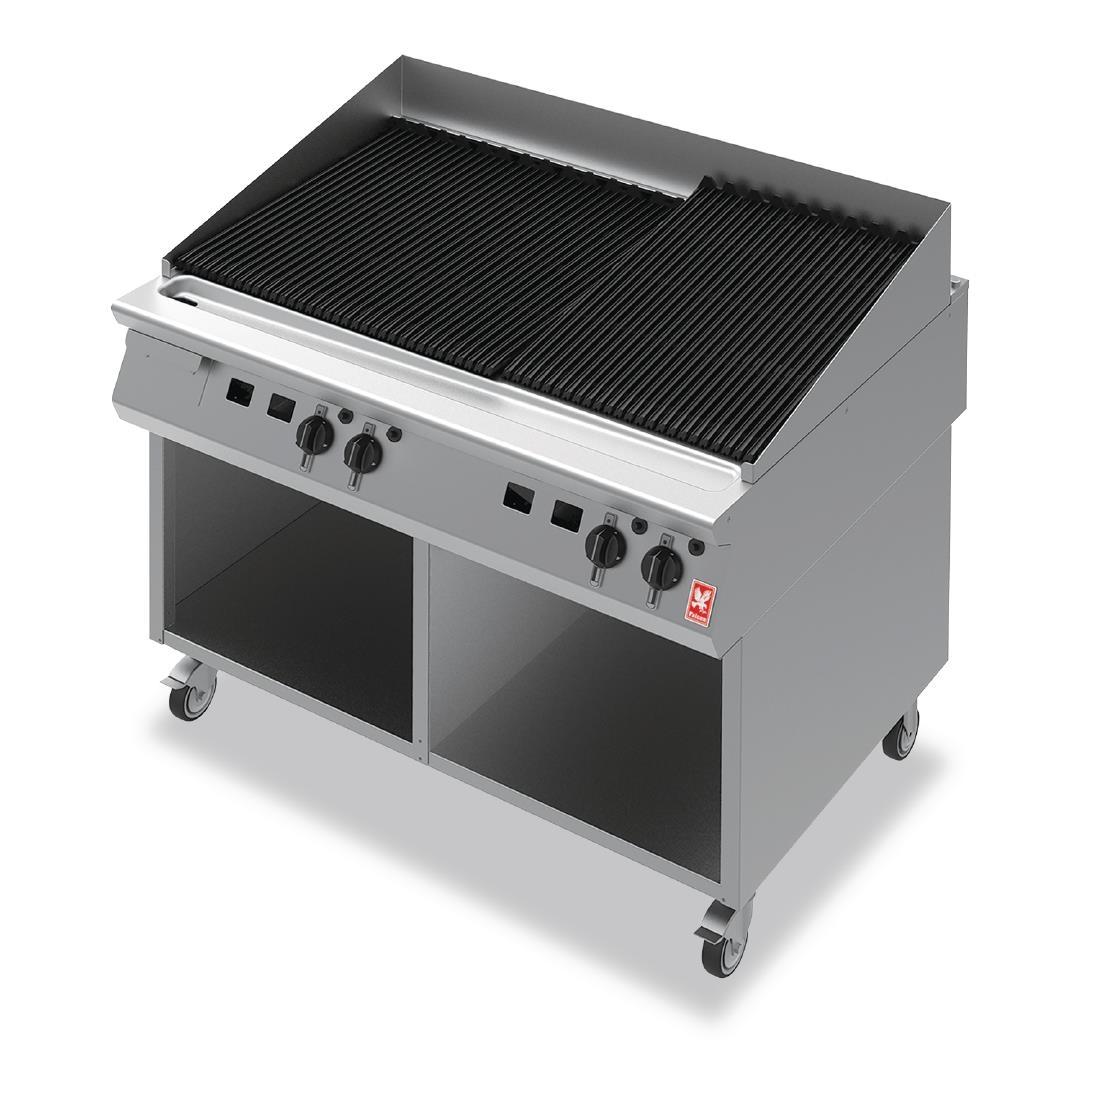 Falcon F900 Chargrill on Mobile Stand Natural Gas G94120 - GR450-N  - 1